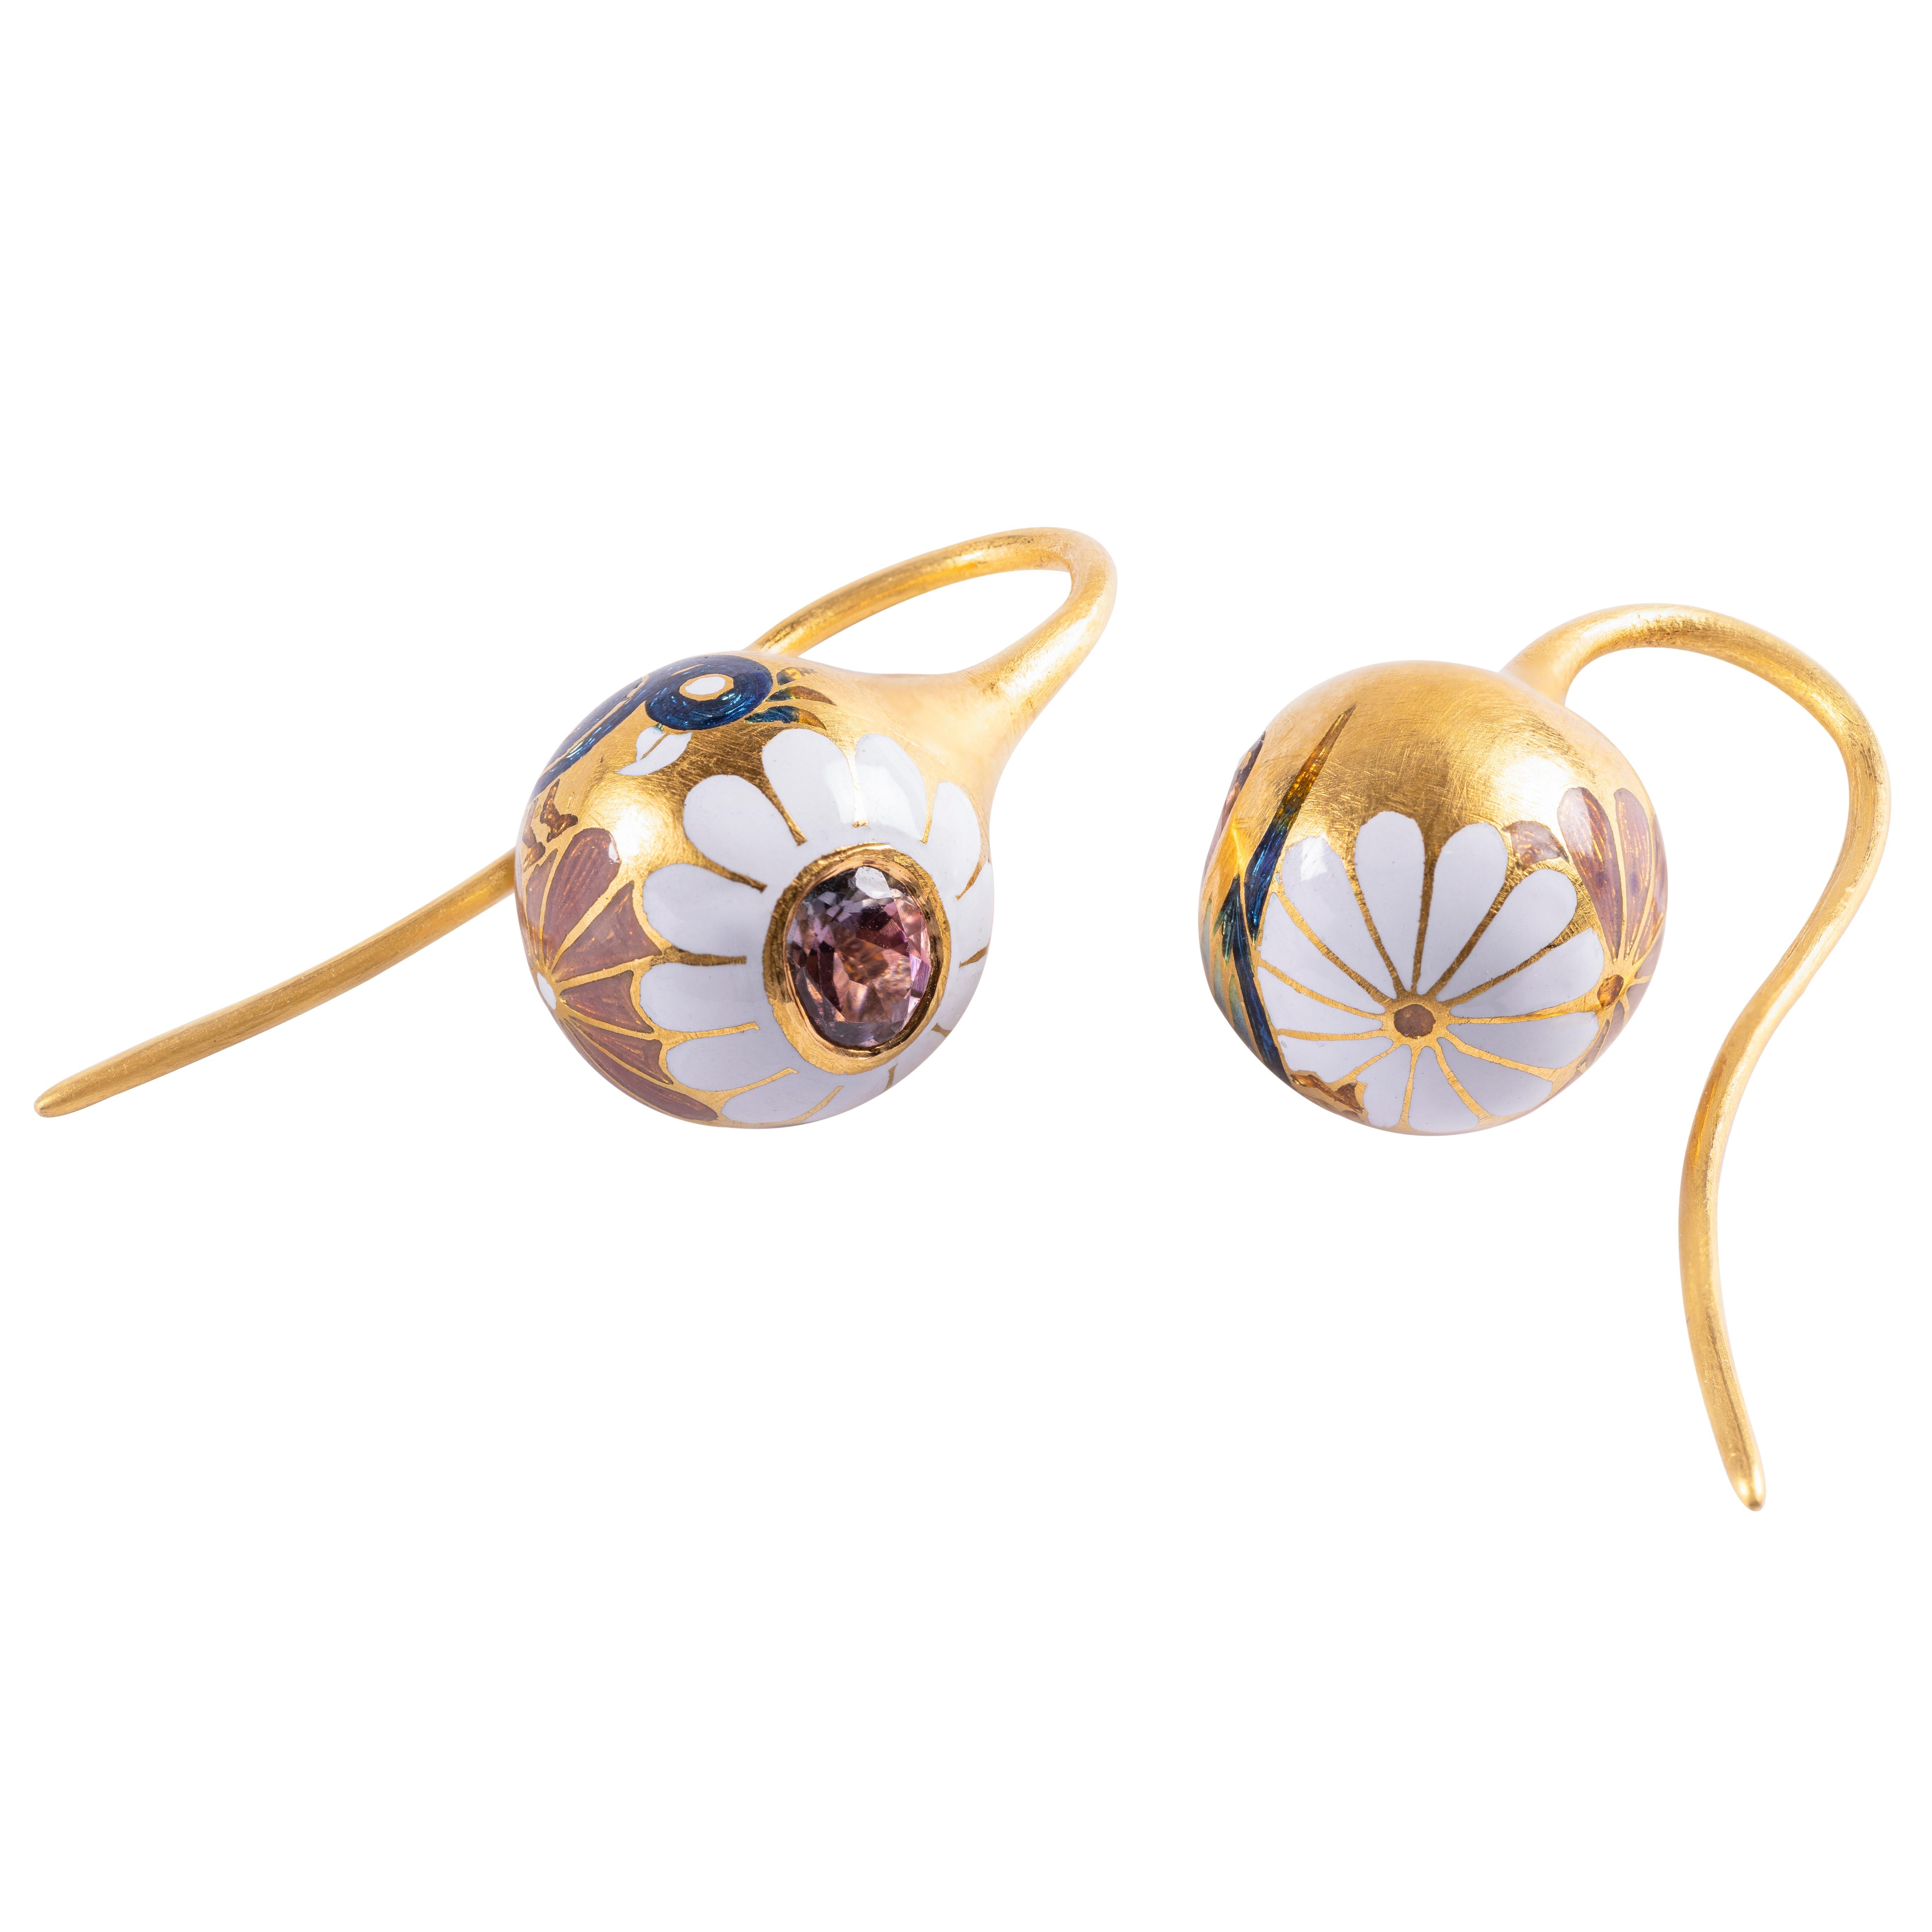 These kettlebell drop earrings are from Agaro Jewels' whimsical Bloom collection. All Agaro jewelry is entirely handmade, engraved and enameled with hot fired glass enamel using an ancient 17th century jewelry making art from the ateliers of the